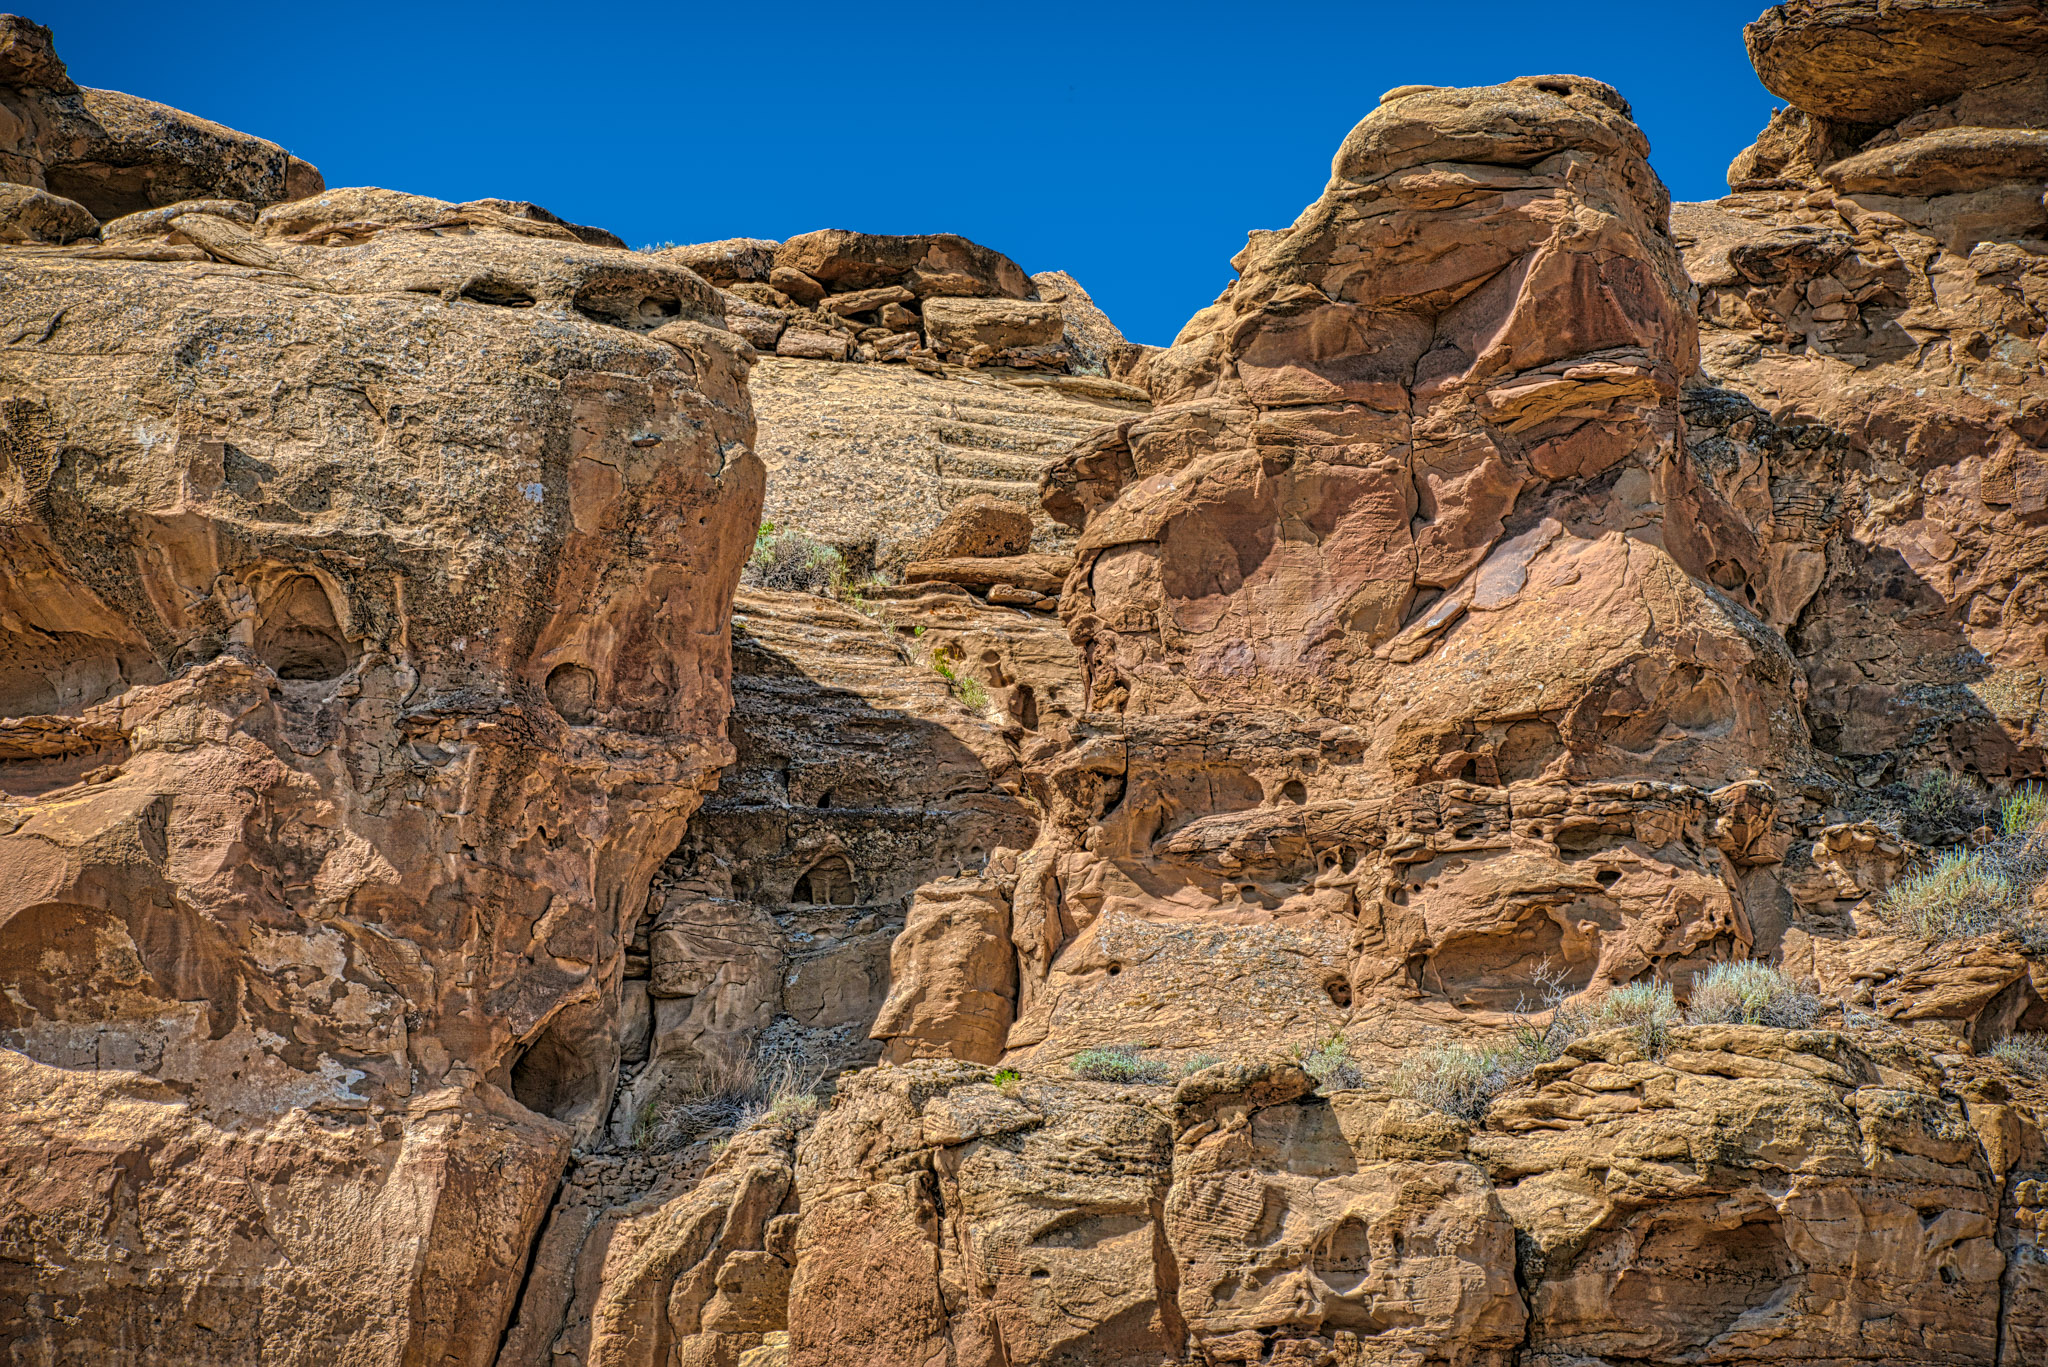 This Chacoan Stairway is located south of Chetro Ketl, across Chaco Wash, and cuts up the southern canyon wall.